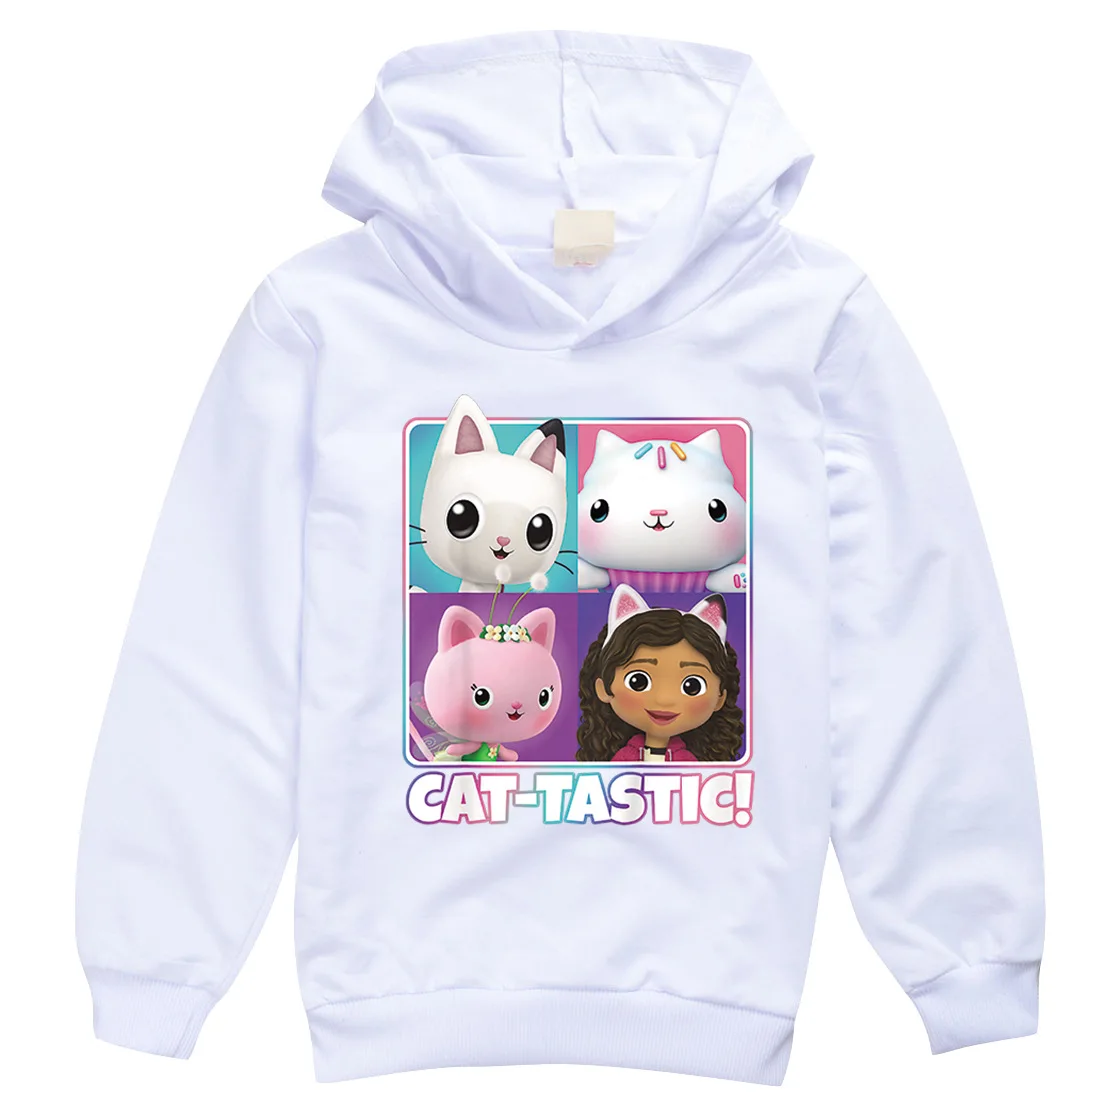 child childhood hoodie Anime Cat Tastic Hoodie Kids Gabby Cats Clothes Toddler Girls Hoodies Boys Spring Clothes Children Cosplay Cartoon Hooded Coats children's hooded tops